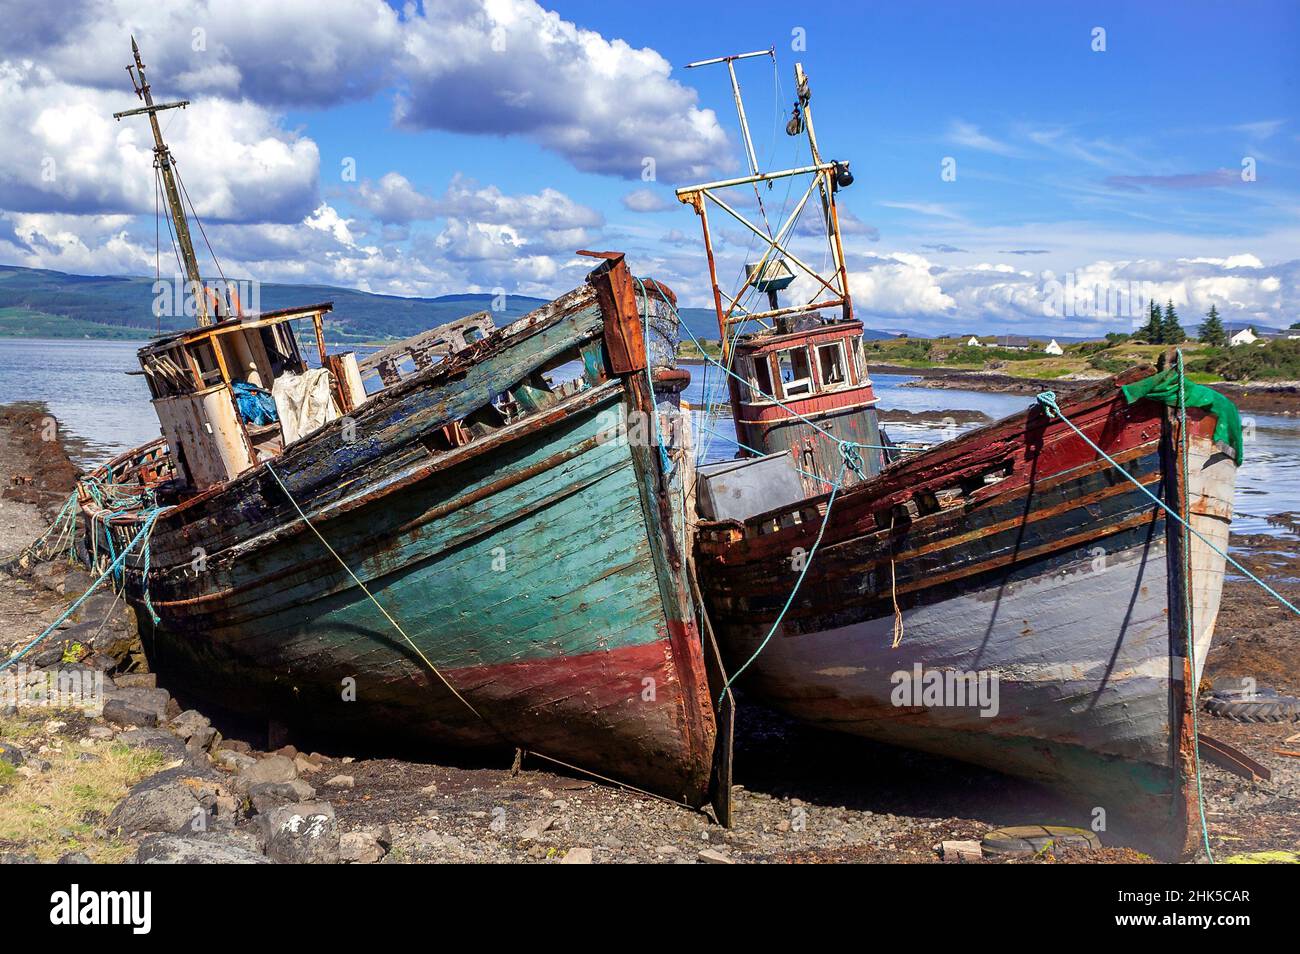 Beached & abandoned herring fishing boats as result of dying industry near Salen,Isle of Mull, Inner Hebrides, Argyll and Bute, Scotland, UK, Europe Stock Photo